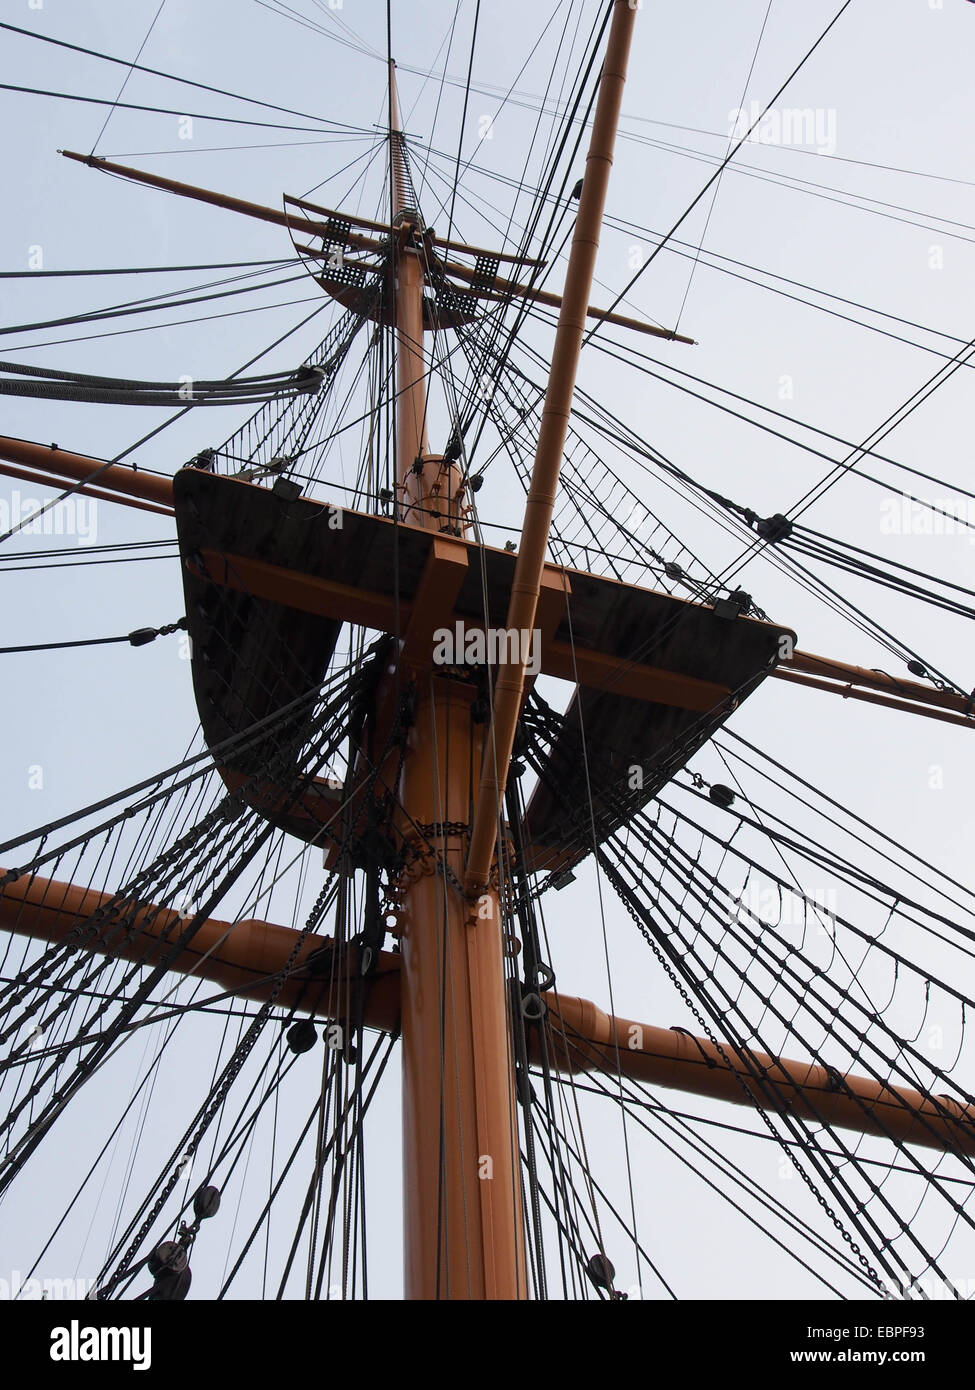 The main mast oh HMS Warrior with the crows nest and rigging clearly visible. Stock Photo